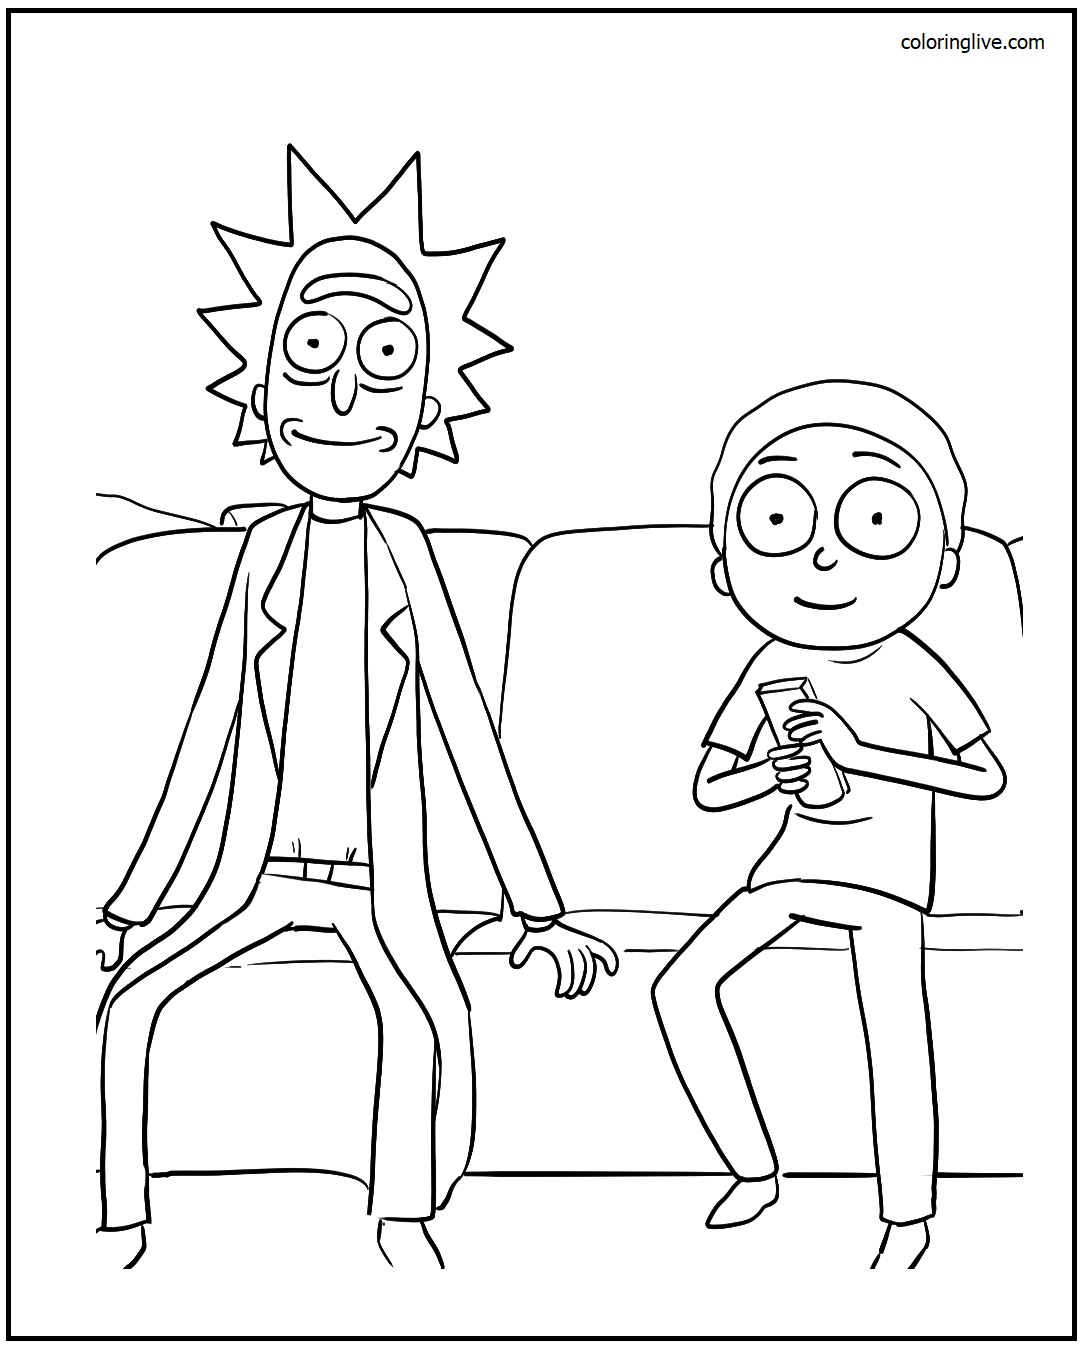 Printable Rick and Morty watching tv Coloring Page for kids.